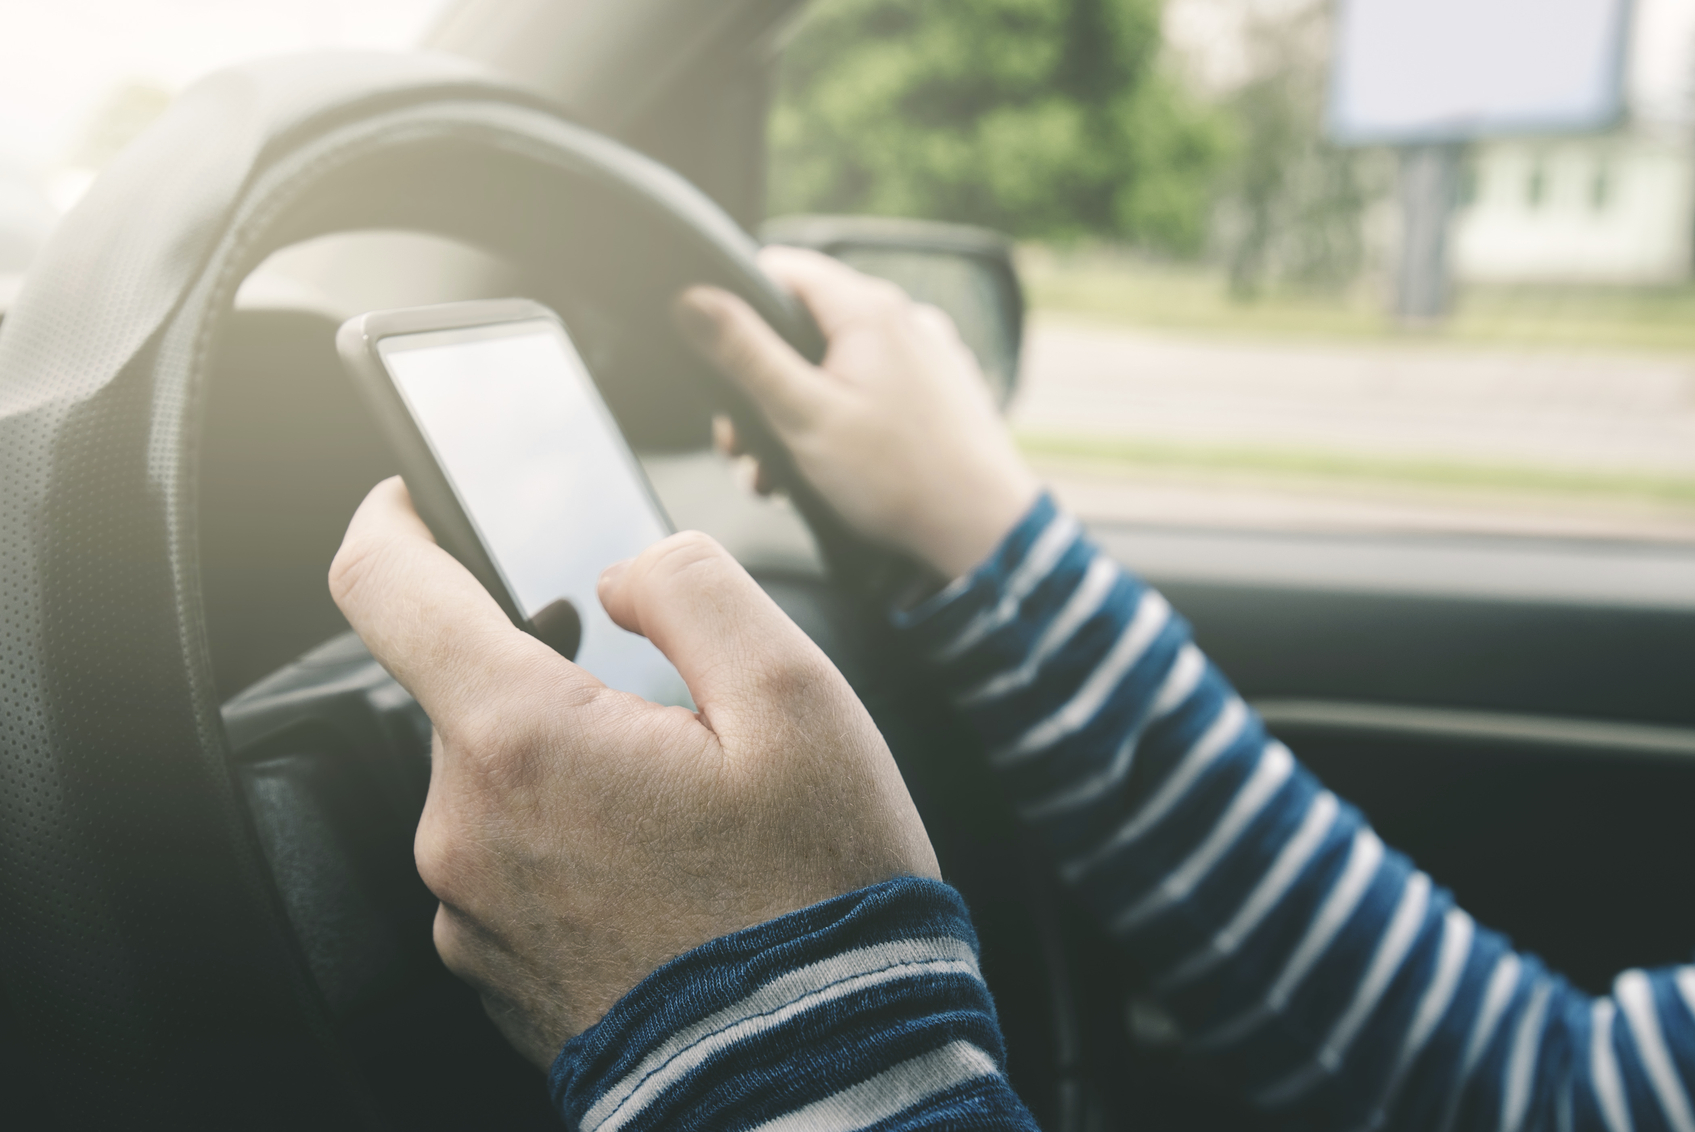 How Much Does A Texting Ticket Cost in Florida